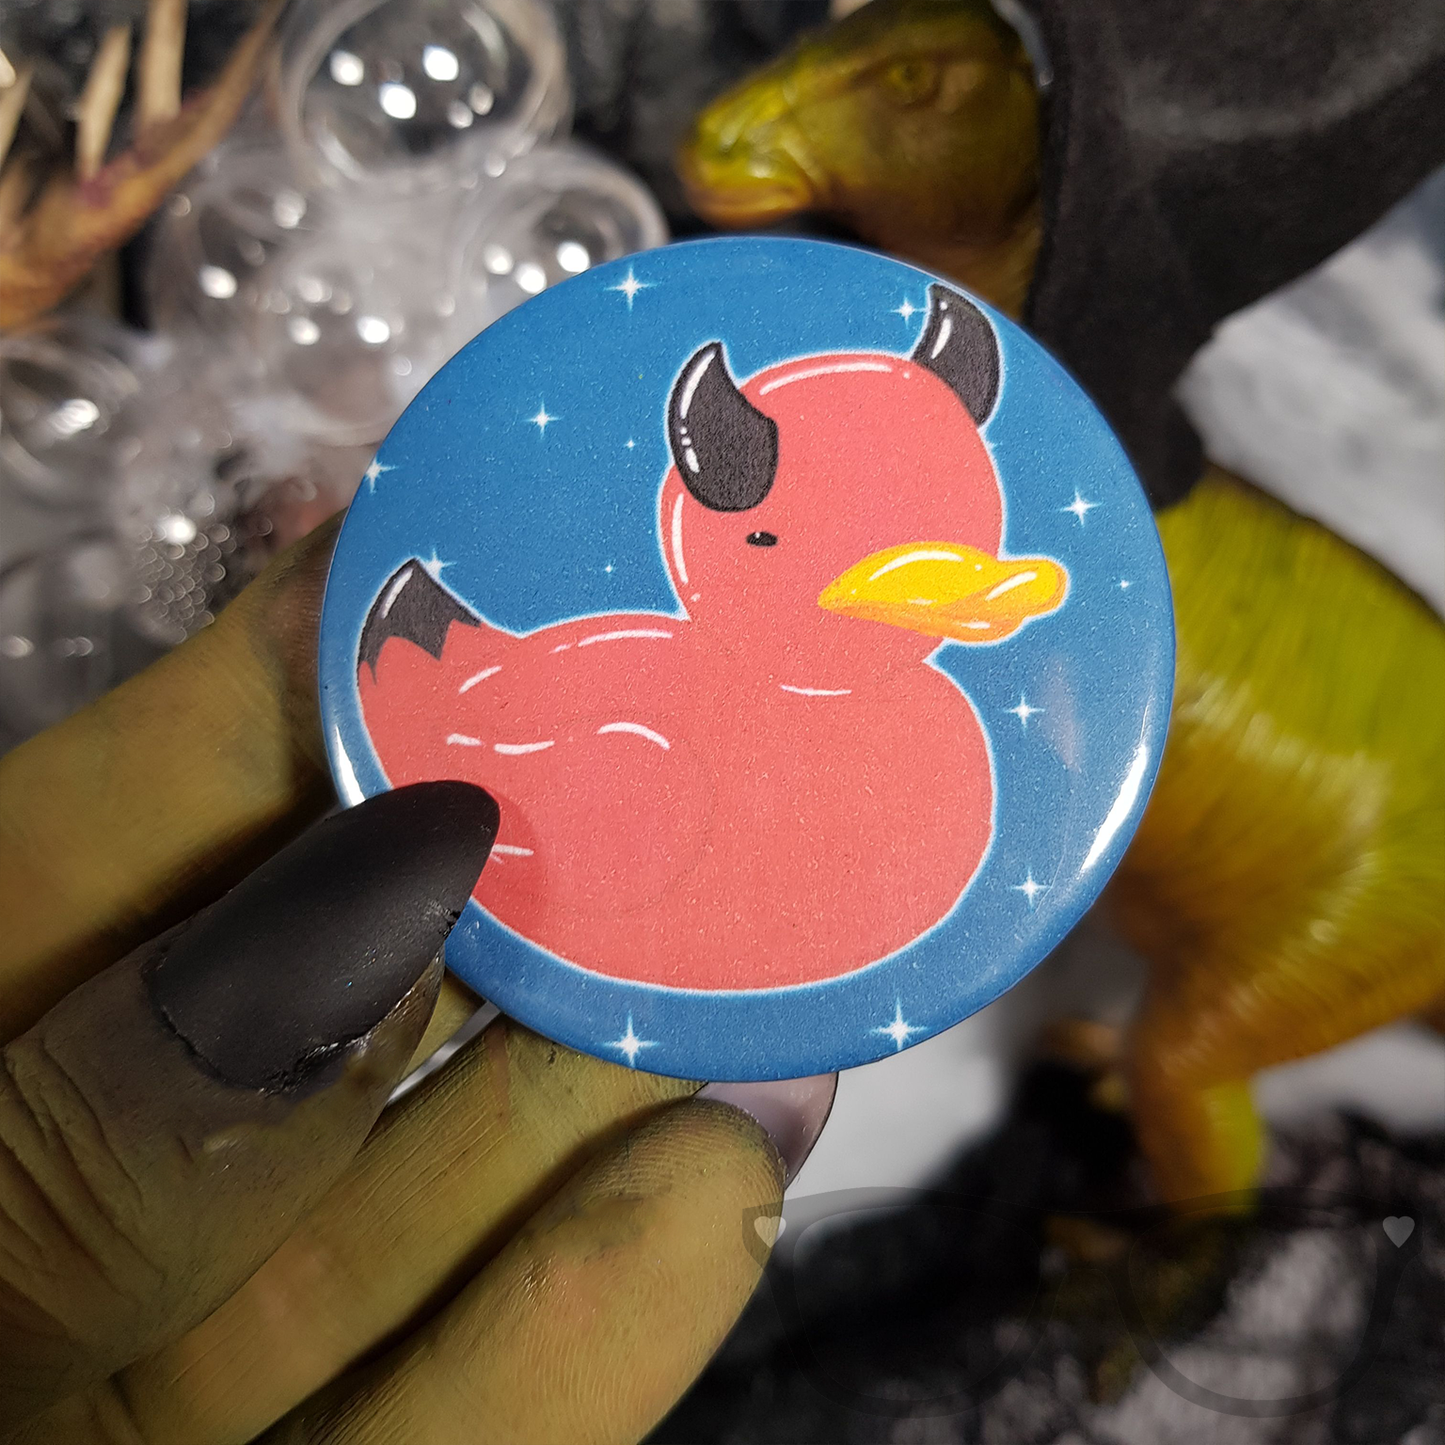 Beelzeduck 58mm badge, great as a treat for Halloween. Badge is being held by a witchy hand.